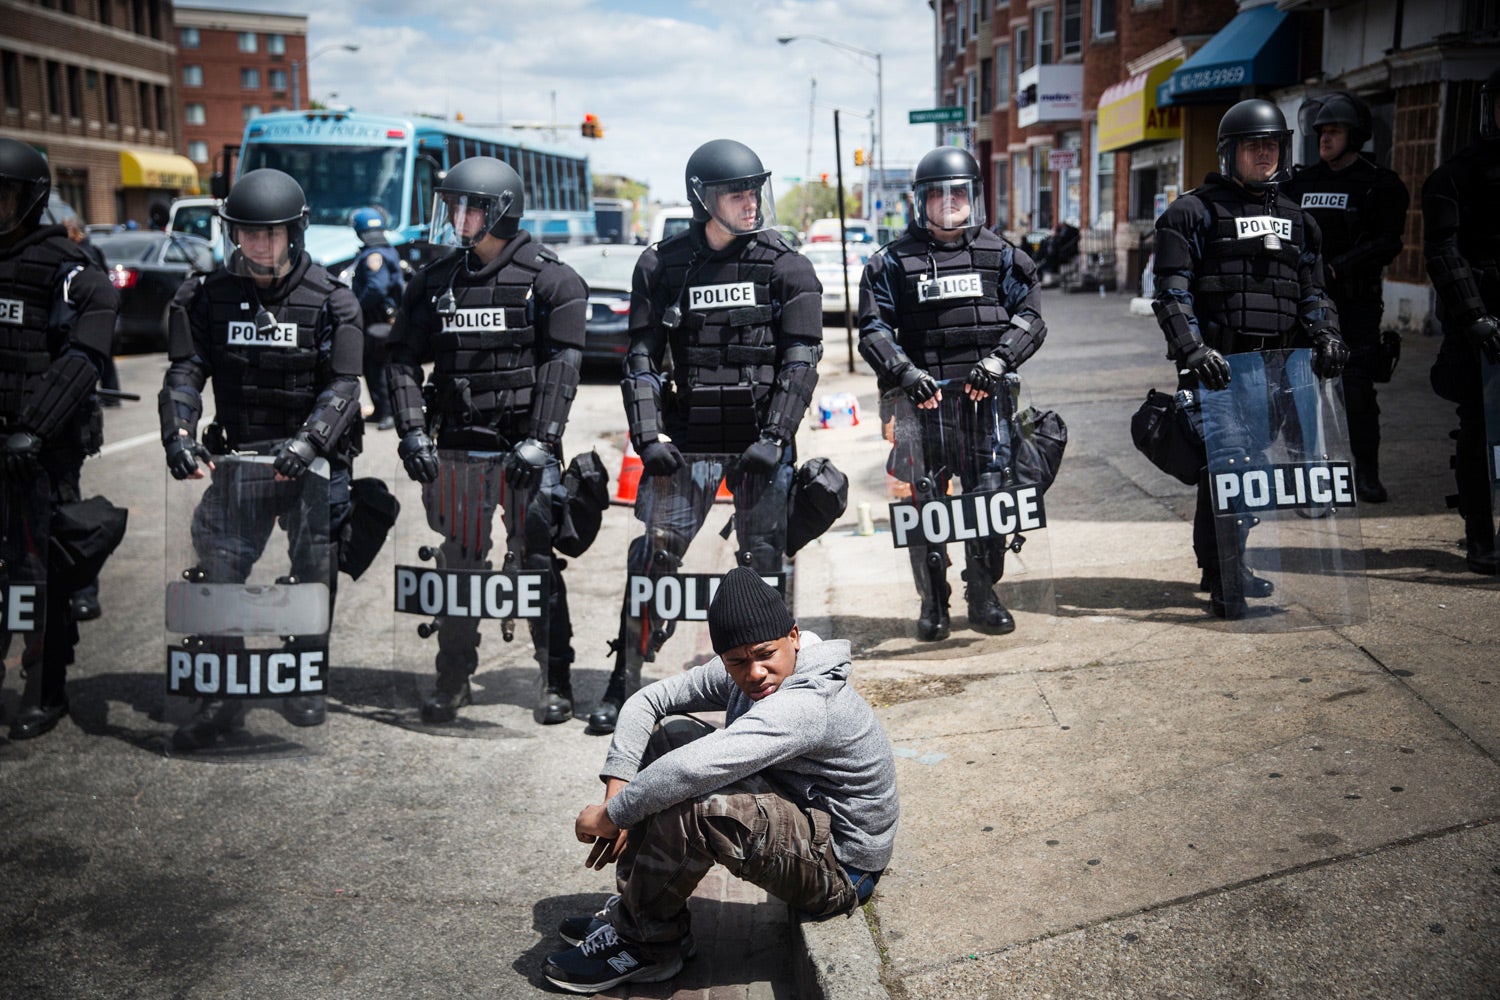 A Comprehensive Timeline of the Freddie Gray Tragedy